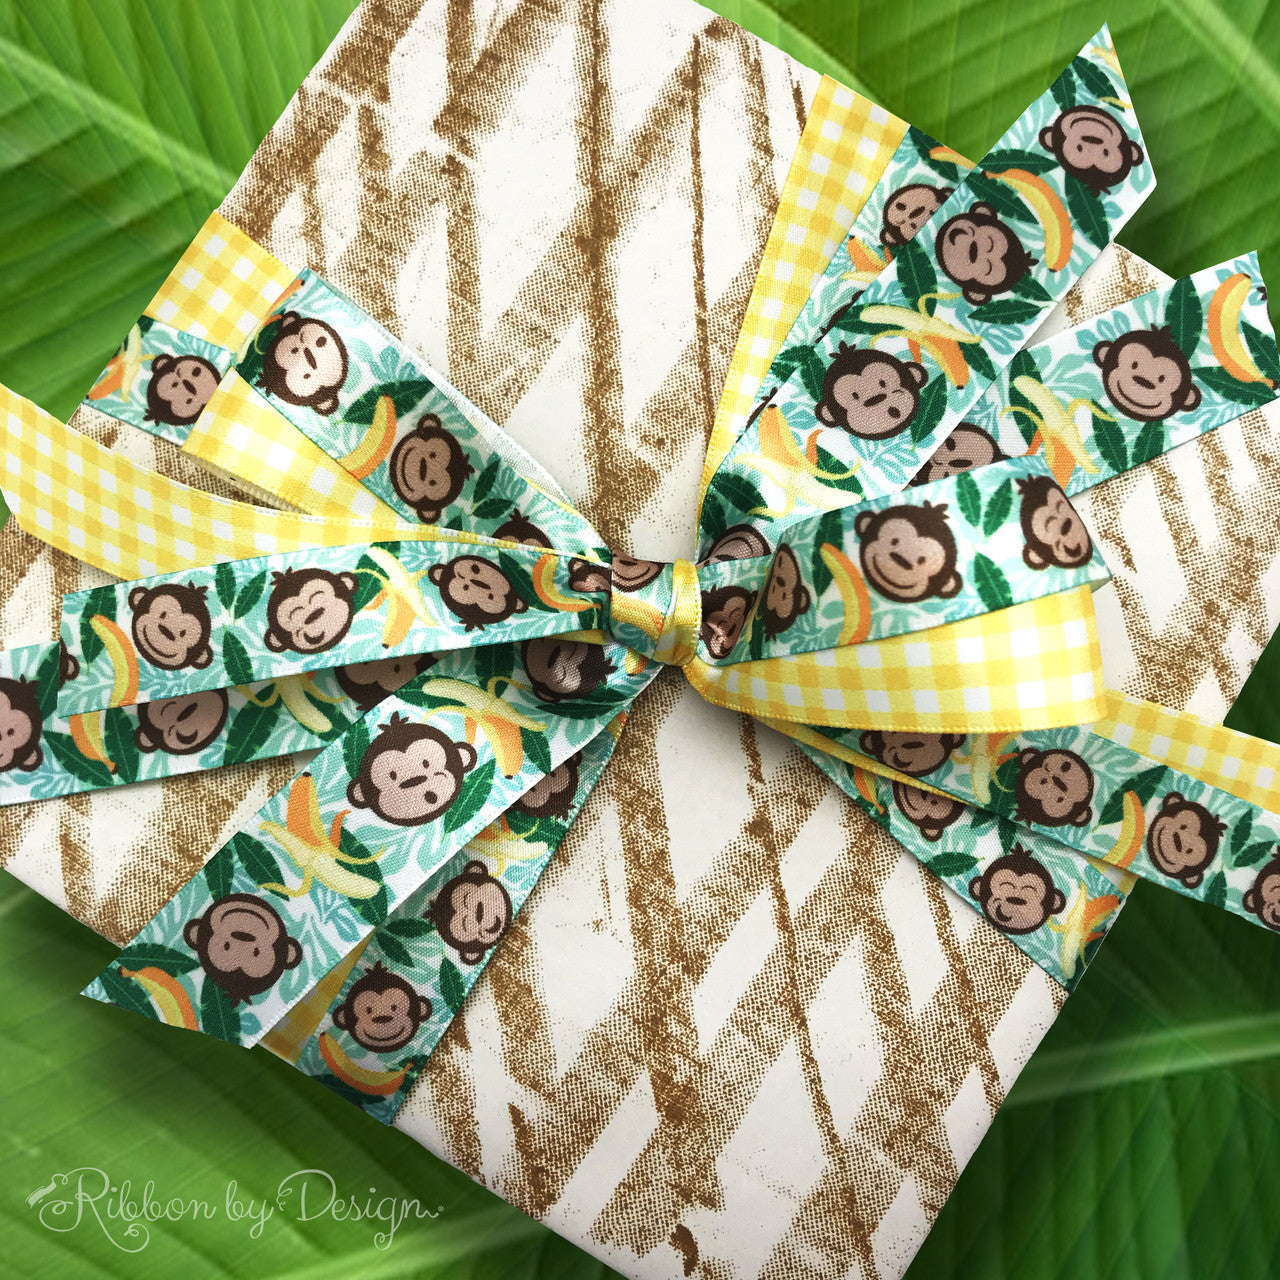 This fun little package is paired with a yellow gingham ribbon to really make the pattern pop! Combining ribbons on a single package makes for some very interesting gift wrap!